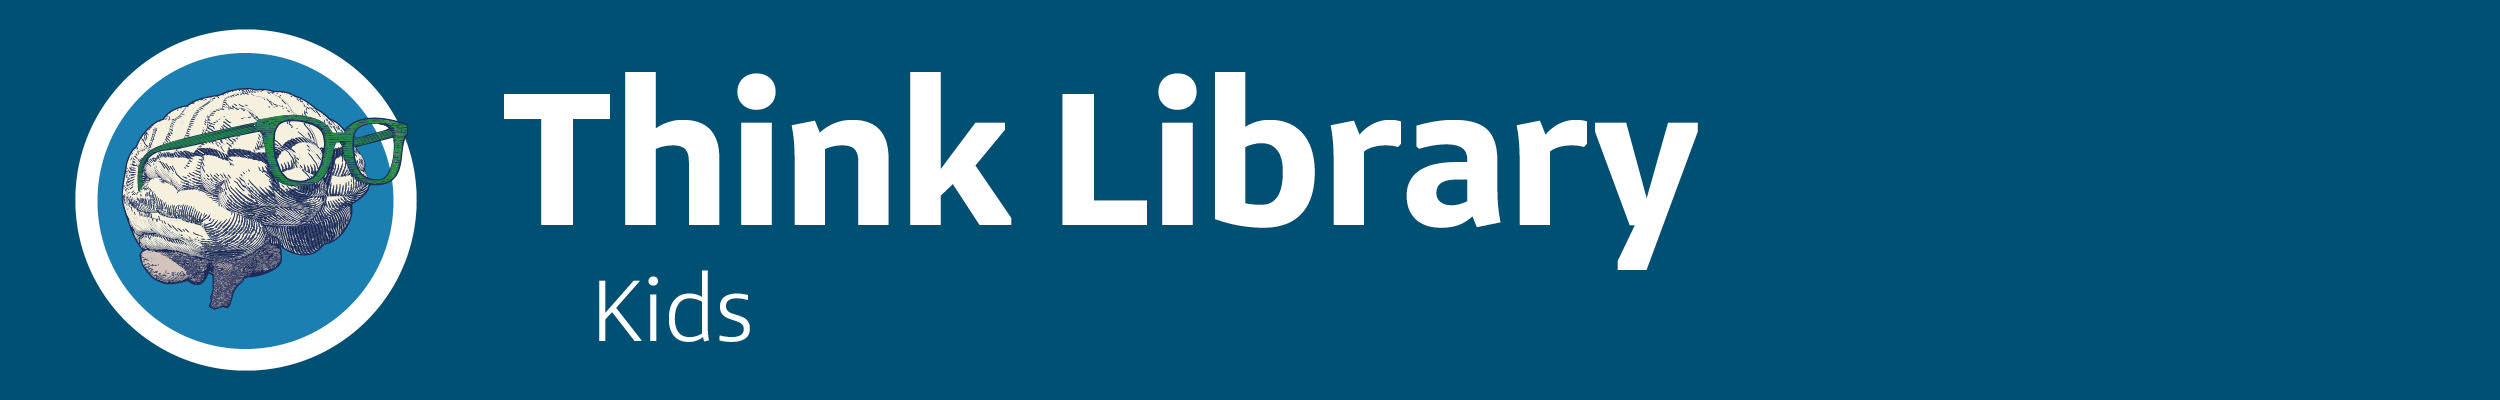 Think Library: For Kids